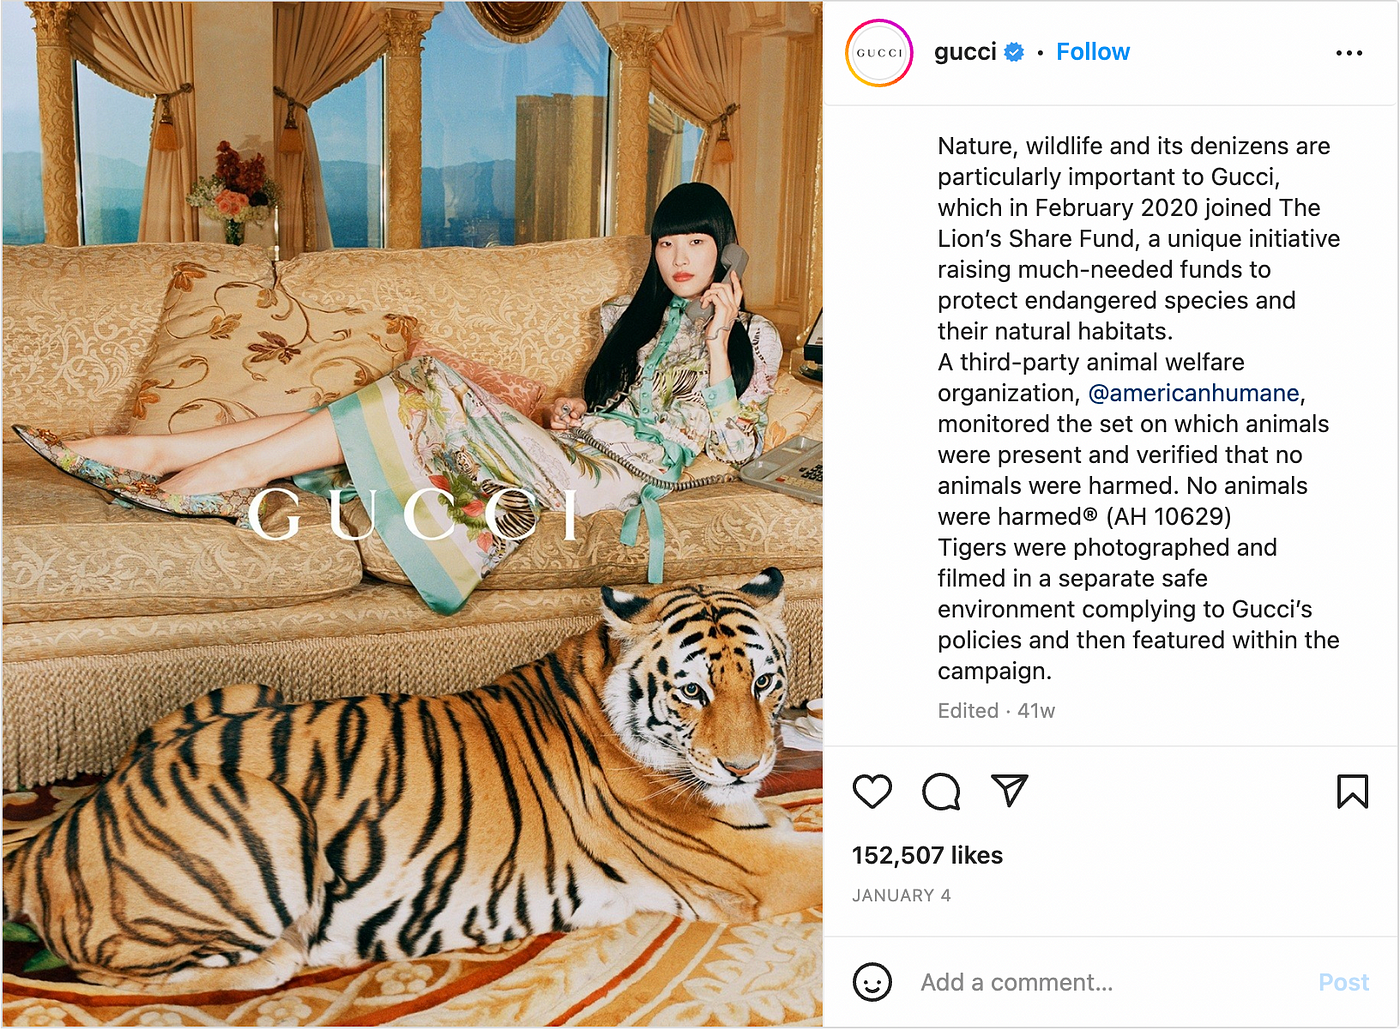 Gucci Criticized for the Use of Real Tigers in Year of the Tiger Campaign |  by Tina T | Marketing in the Age of Digital | Medium